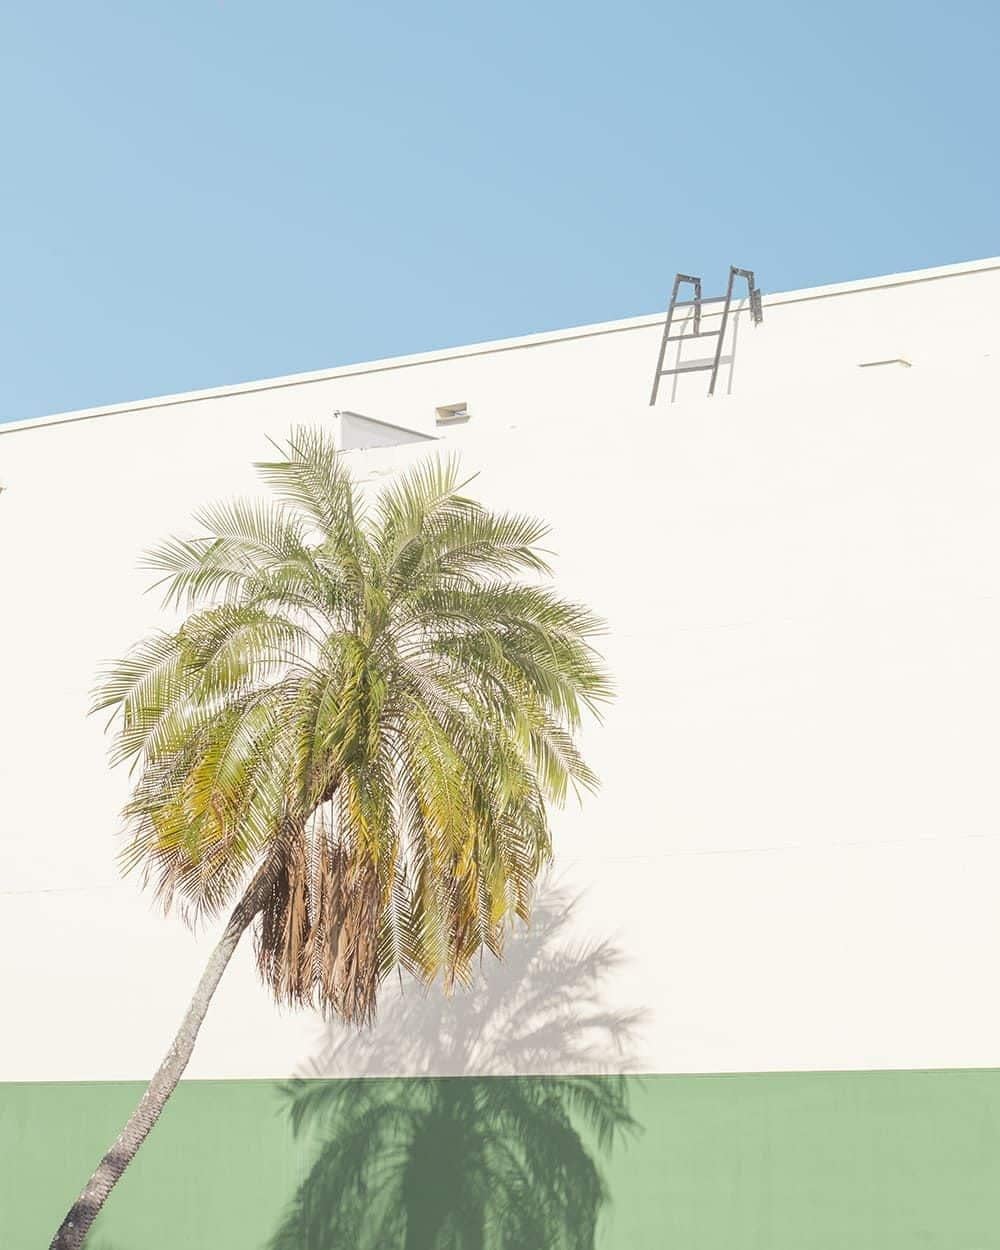 DIALOGUE 09 is a work by contemporary French photographer Matthieu Venot. In this series, he roams the city of Miami looking for deco architecture. With his camera, he cuts up the urban landscape into images where the graphic aspect takes precedence